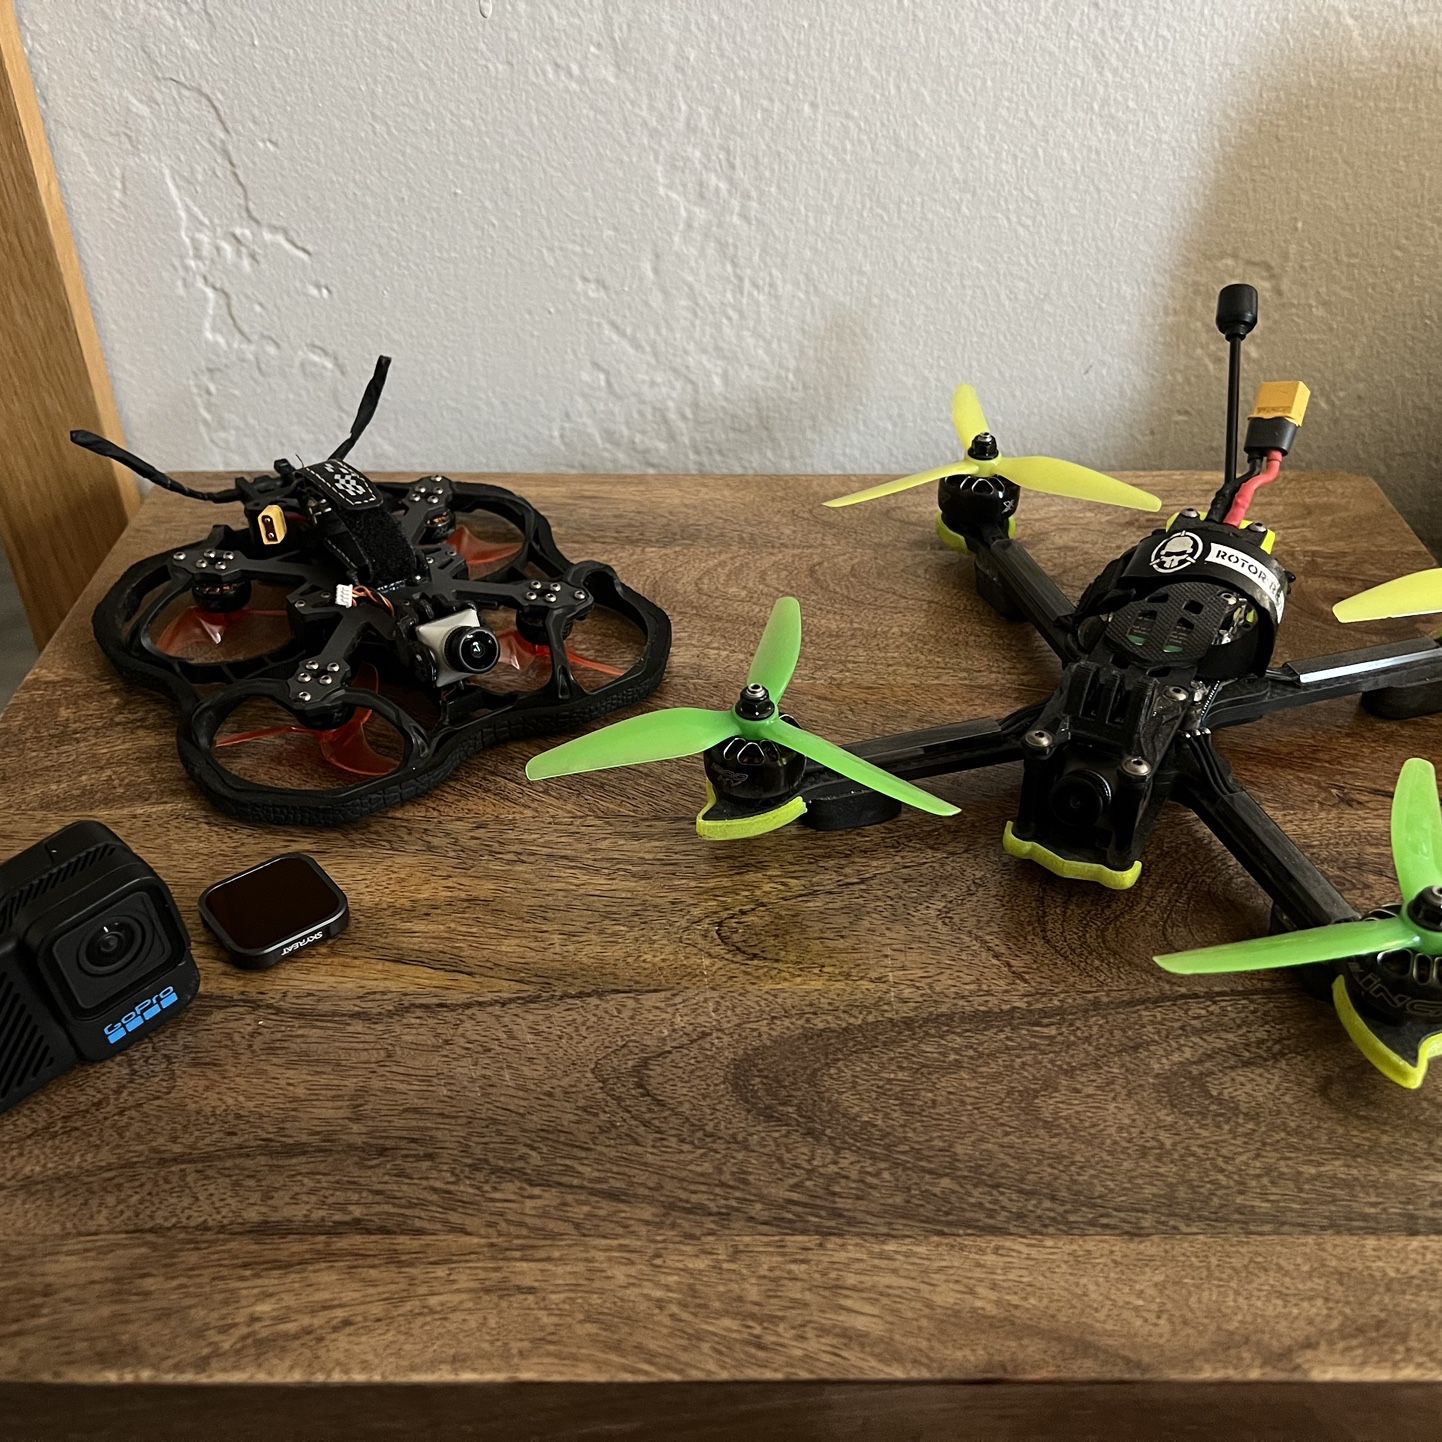 Full FPV 5” And Cinewhoop Kit 